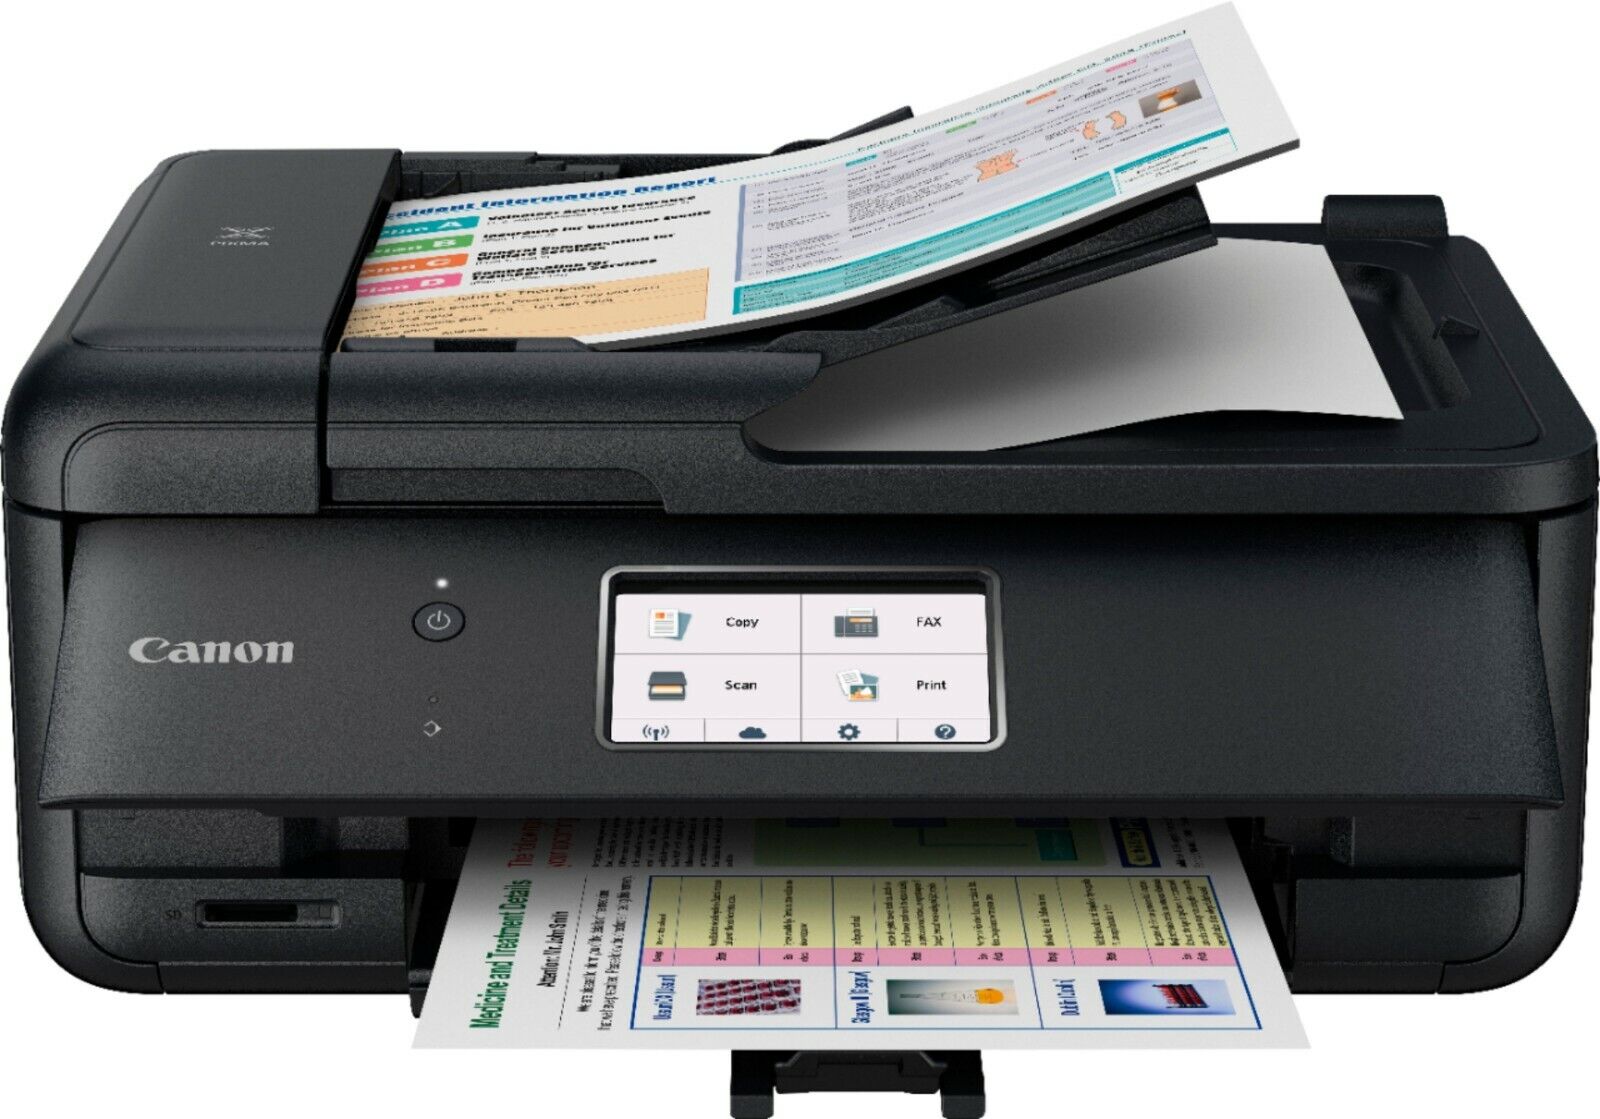 New Canon PIXMA TR8520 Wireless All-in-One Color Inkjet Home Office Printer. Available Now for 269.99